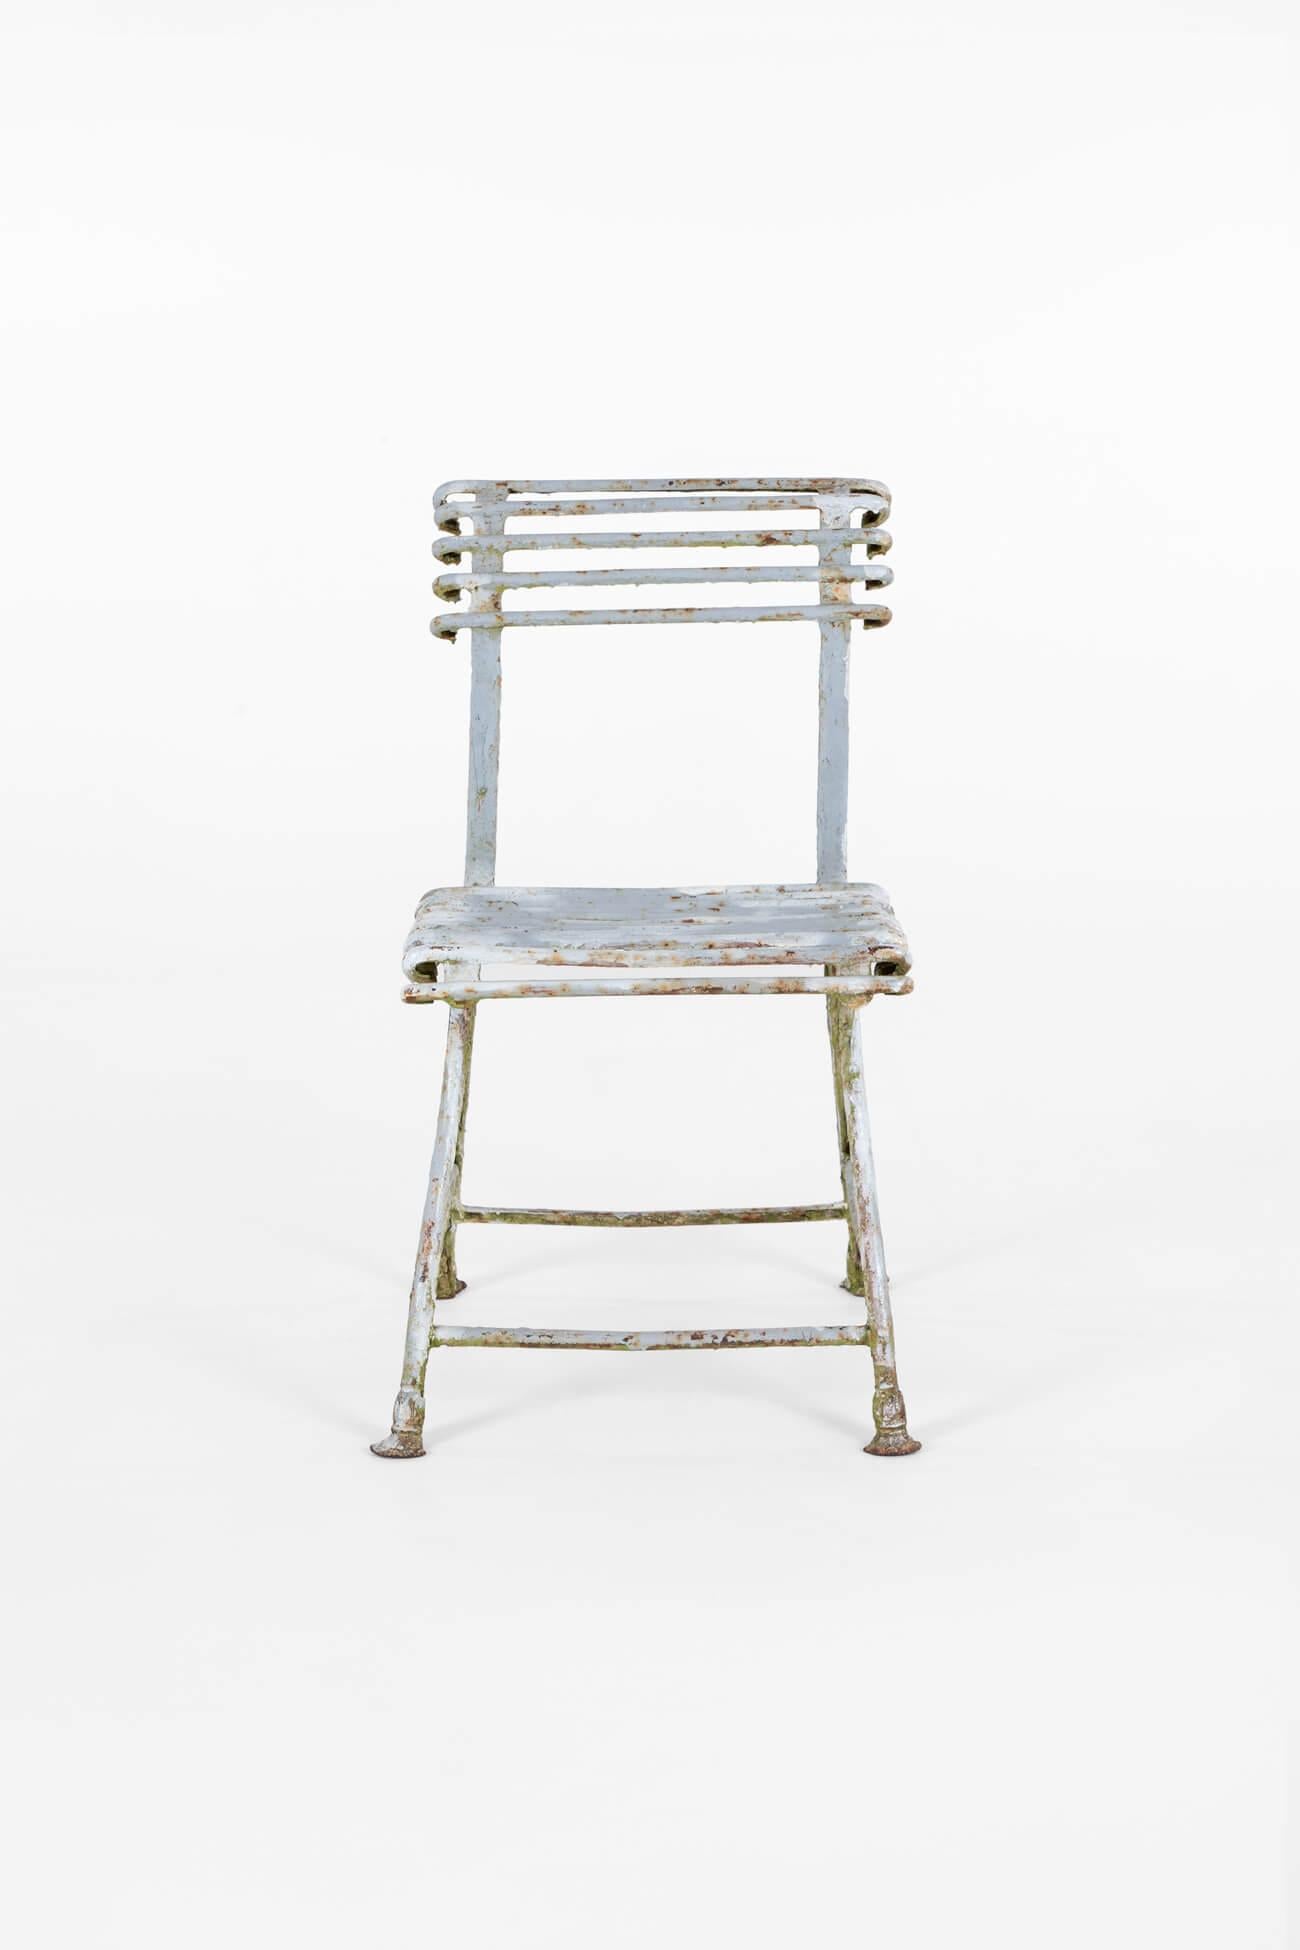 A pretty Arras Orangery or Garden chair from the famous iron factories in the town of Arras, Northern France.

This wonderful example is a blacksmith-made rivetted chair in wrought iron displaying superb age-related wear throughout.

The chair